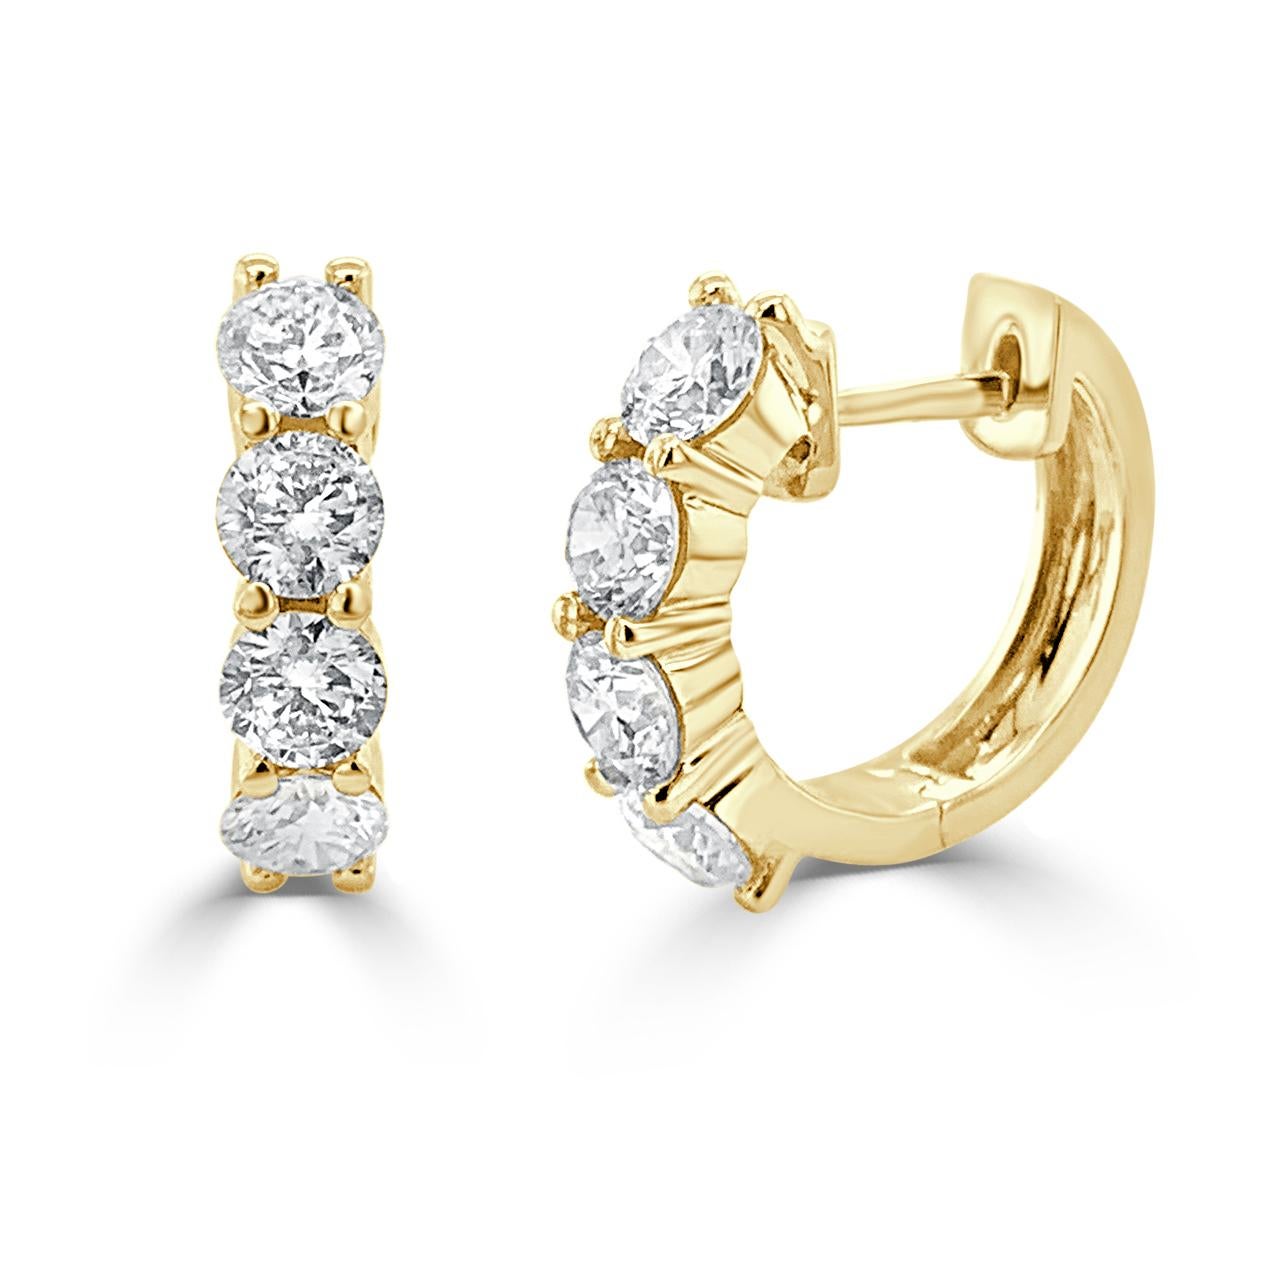 Quality Earrings Set: Made from real 14k gold and glittering natural white approximately 1.4 ct. diamonds, featuring a single line of prong set white diamonds with a color and clarity of GH-SI 

Surprise Your Loved Ones with Our Diamond Earrings For